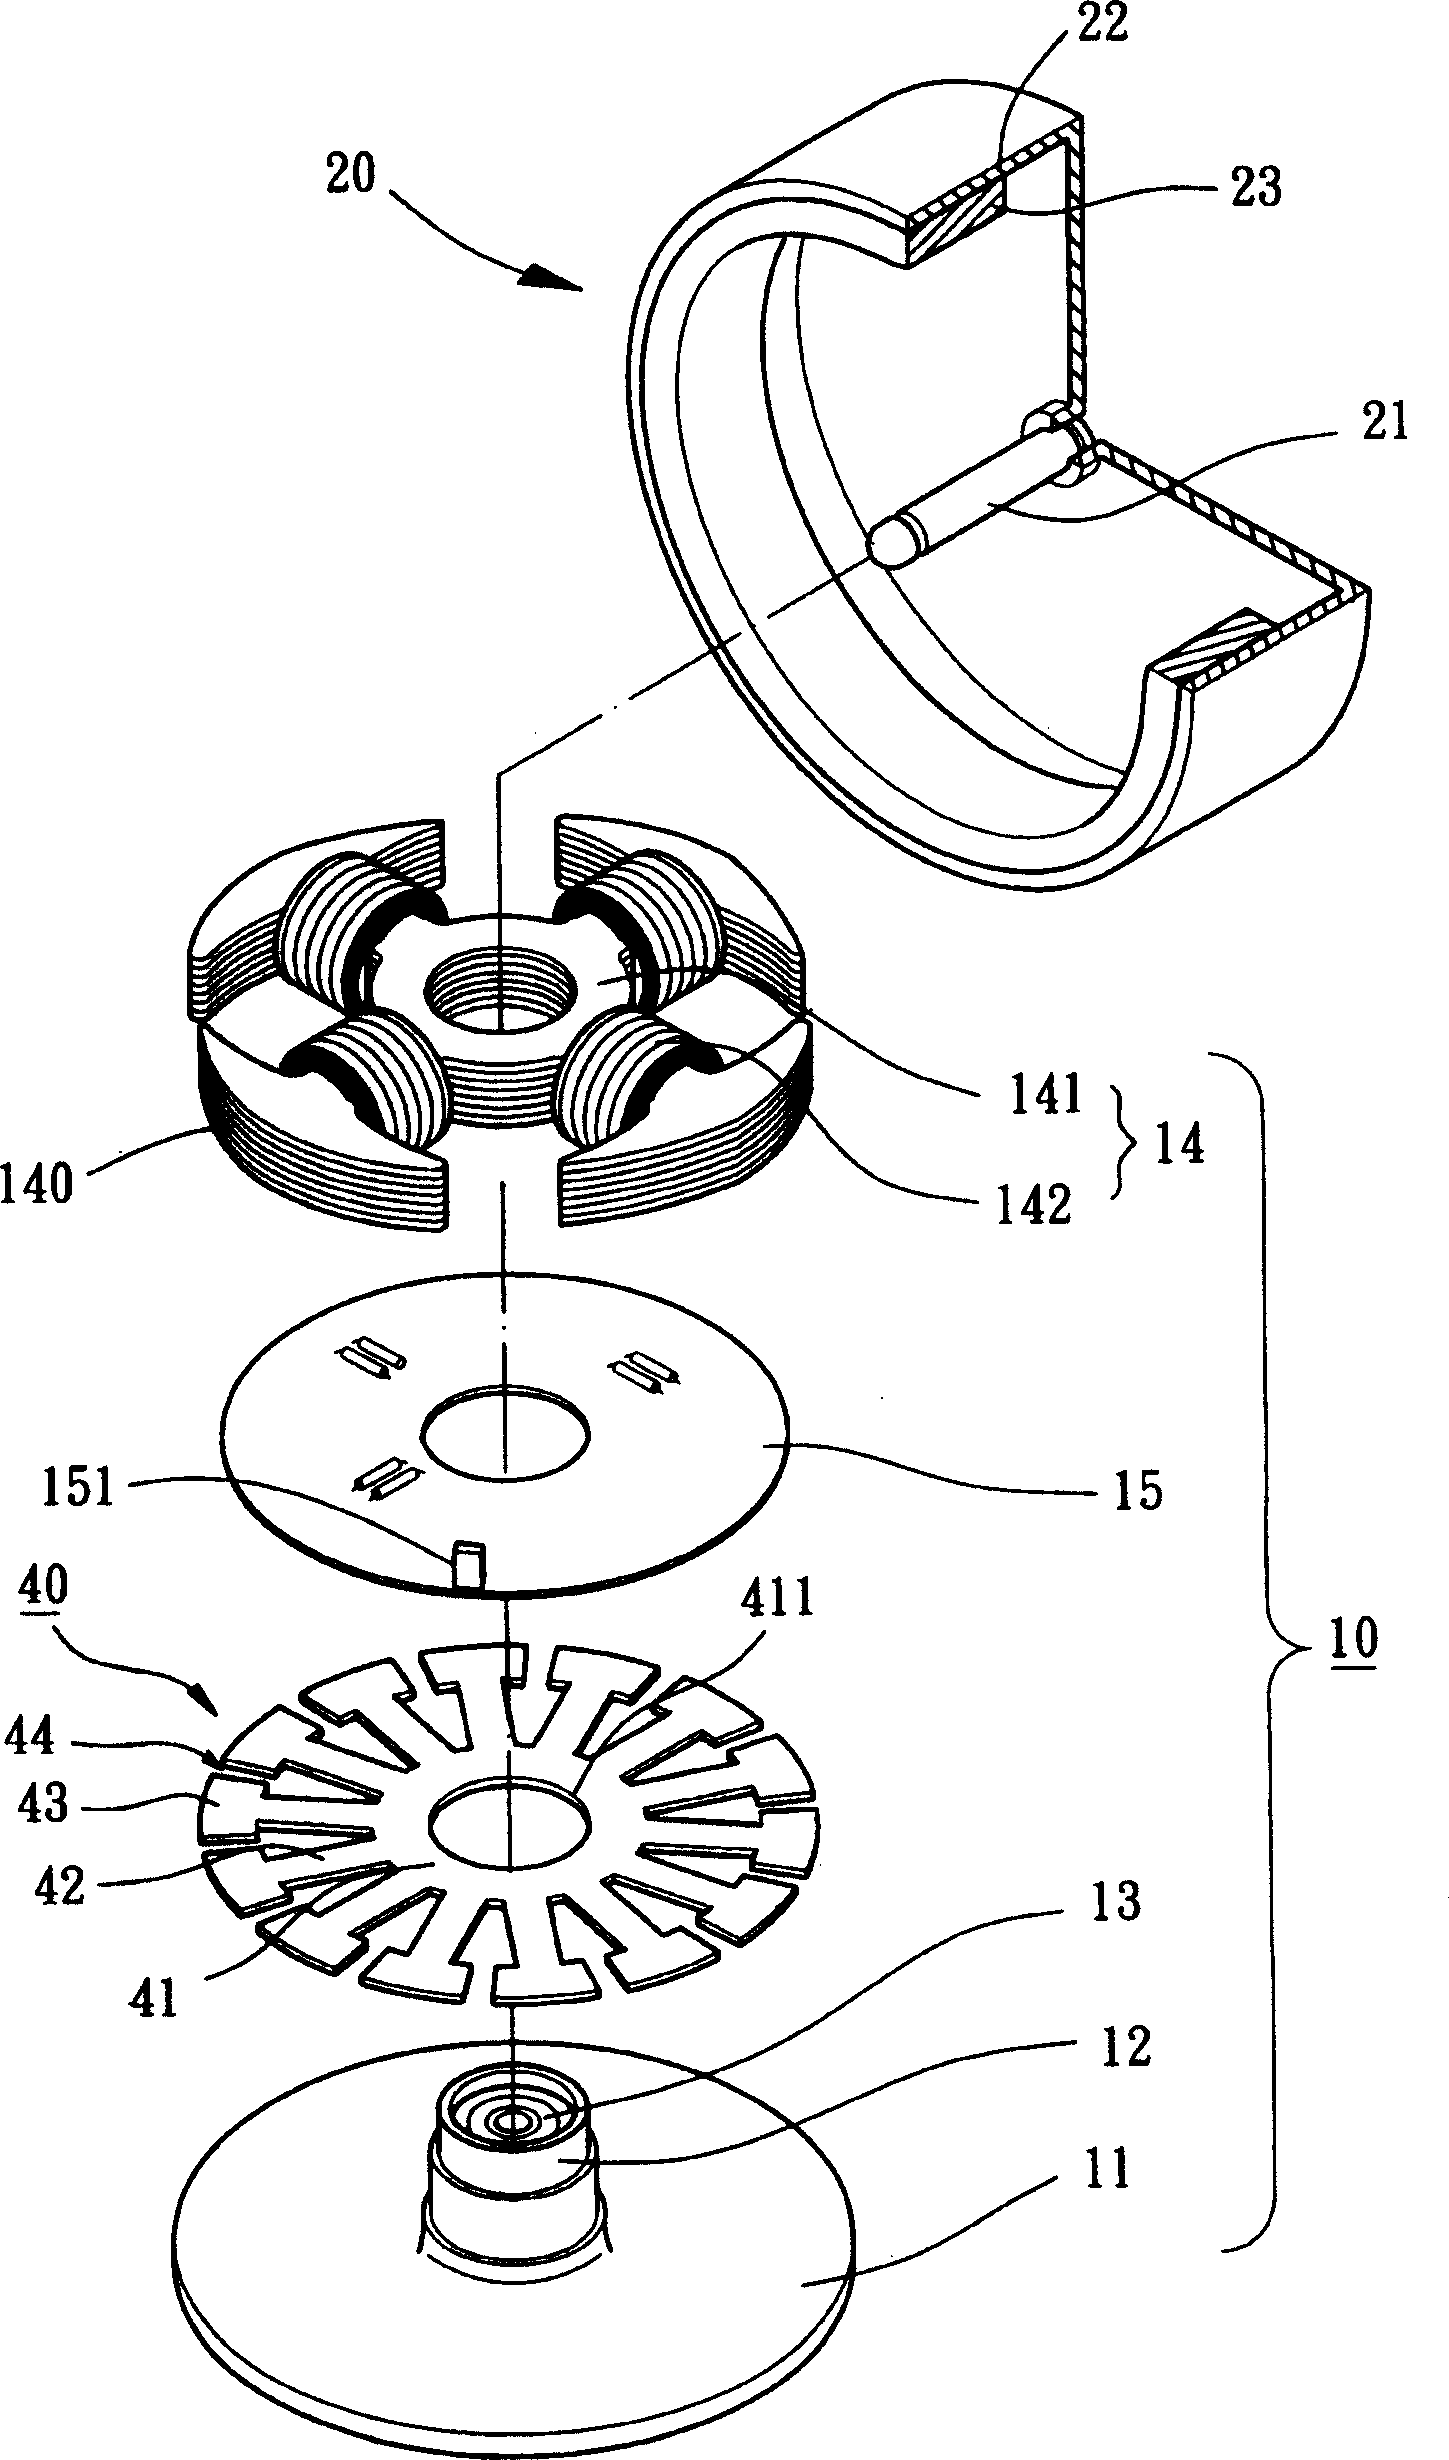 Motor structure